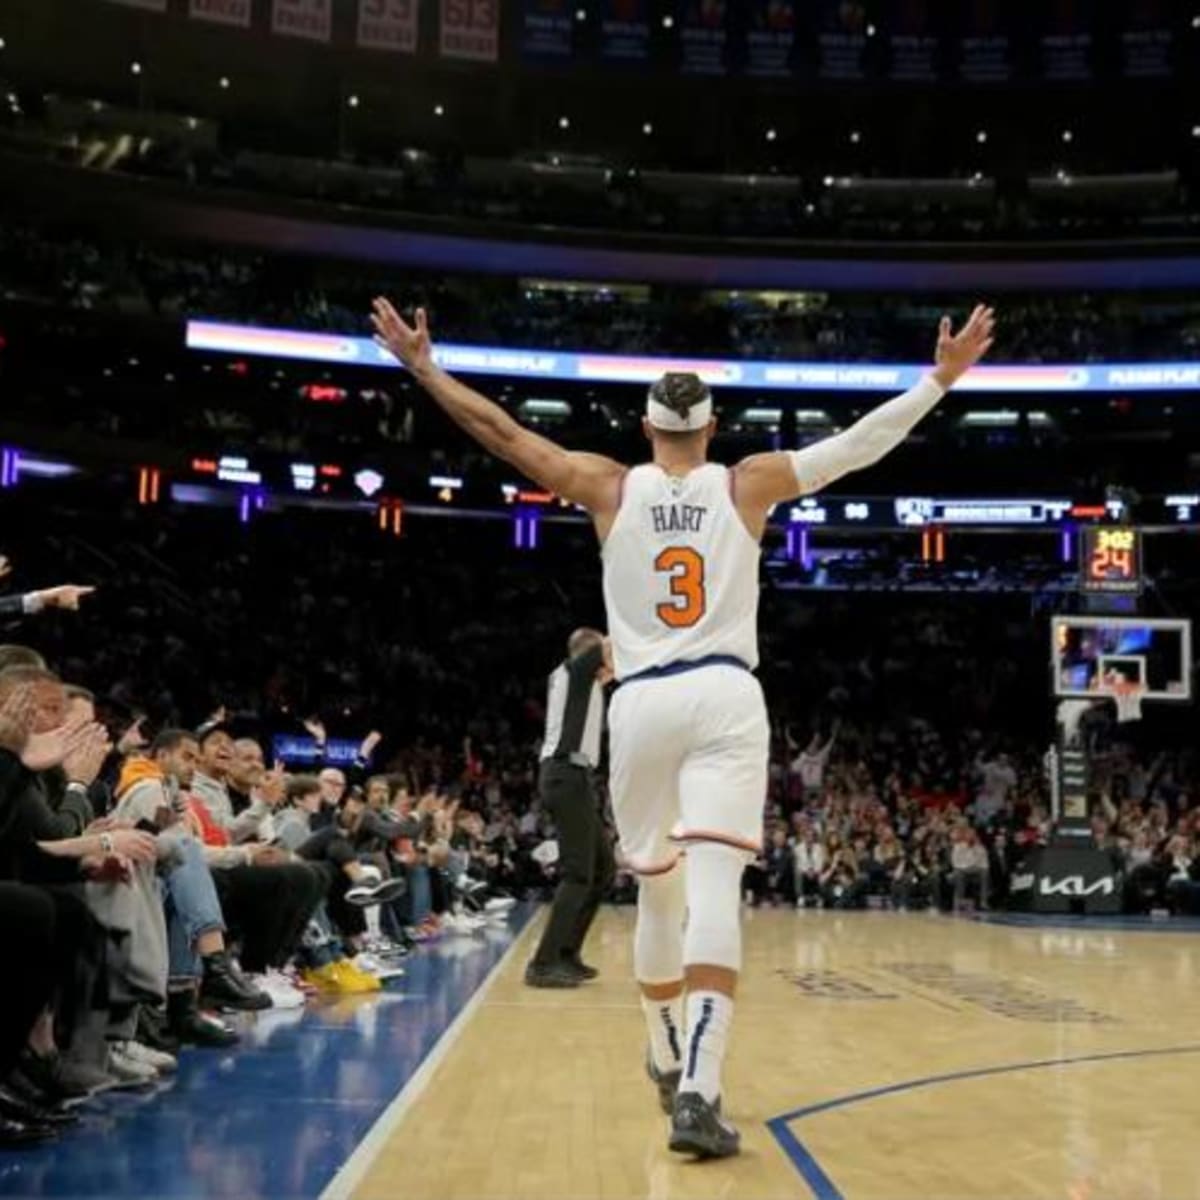 ESPN Stats & Info on X: The Knicks have won a playoff series for